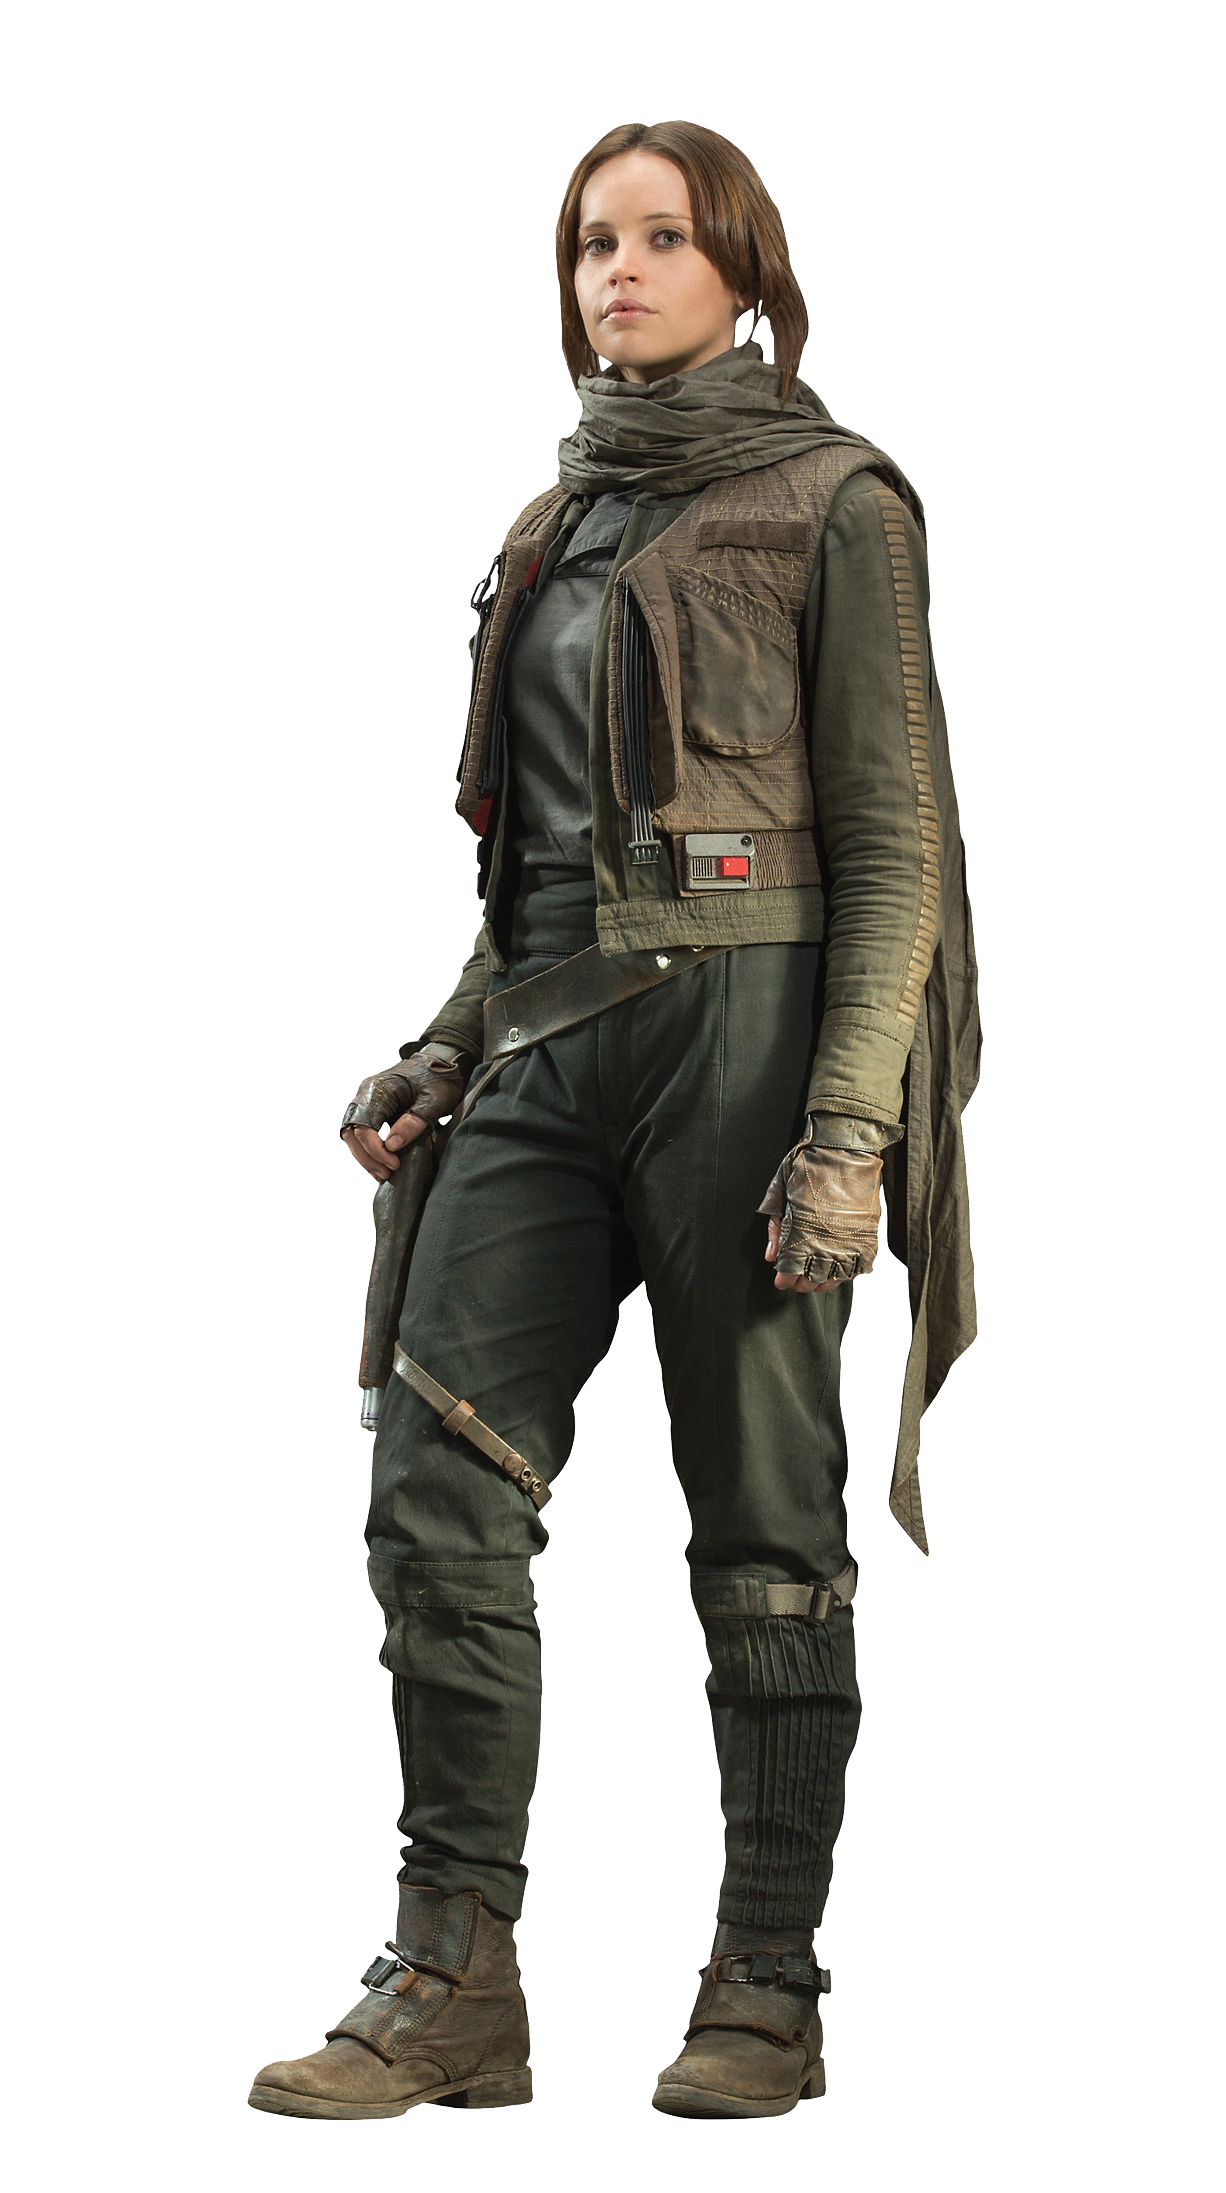 Image - Felicity-jones-as-jyn-erso-the-characters-of-rogue-one-a-star